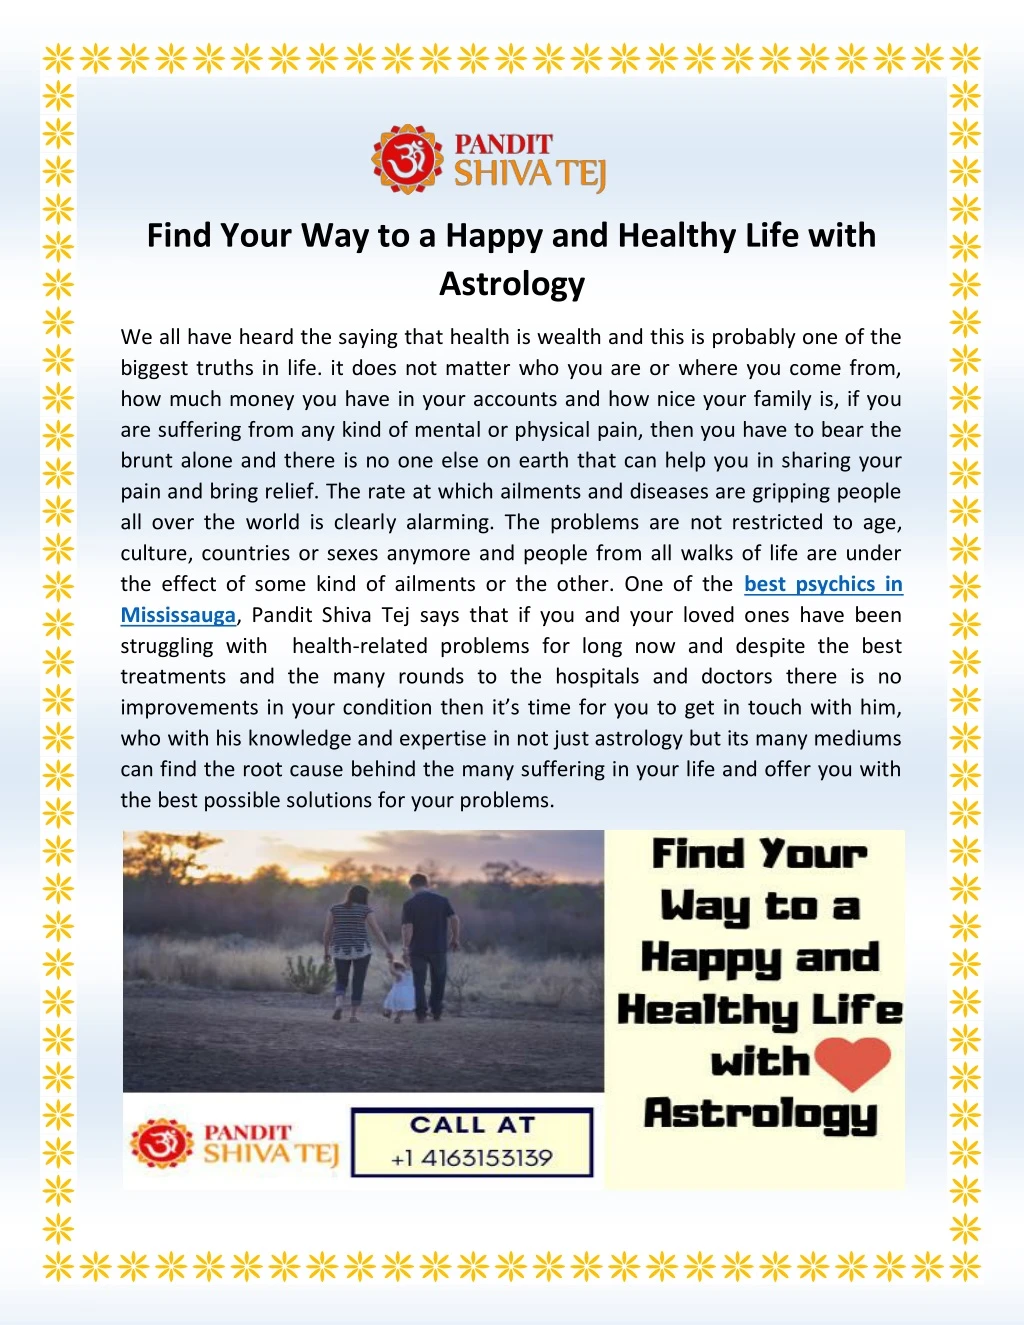 find your way to a happy and healthy life with